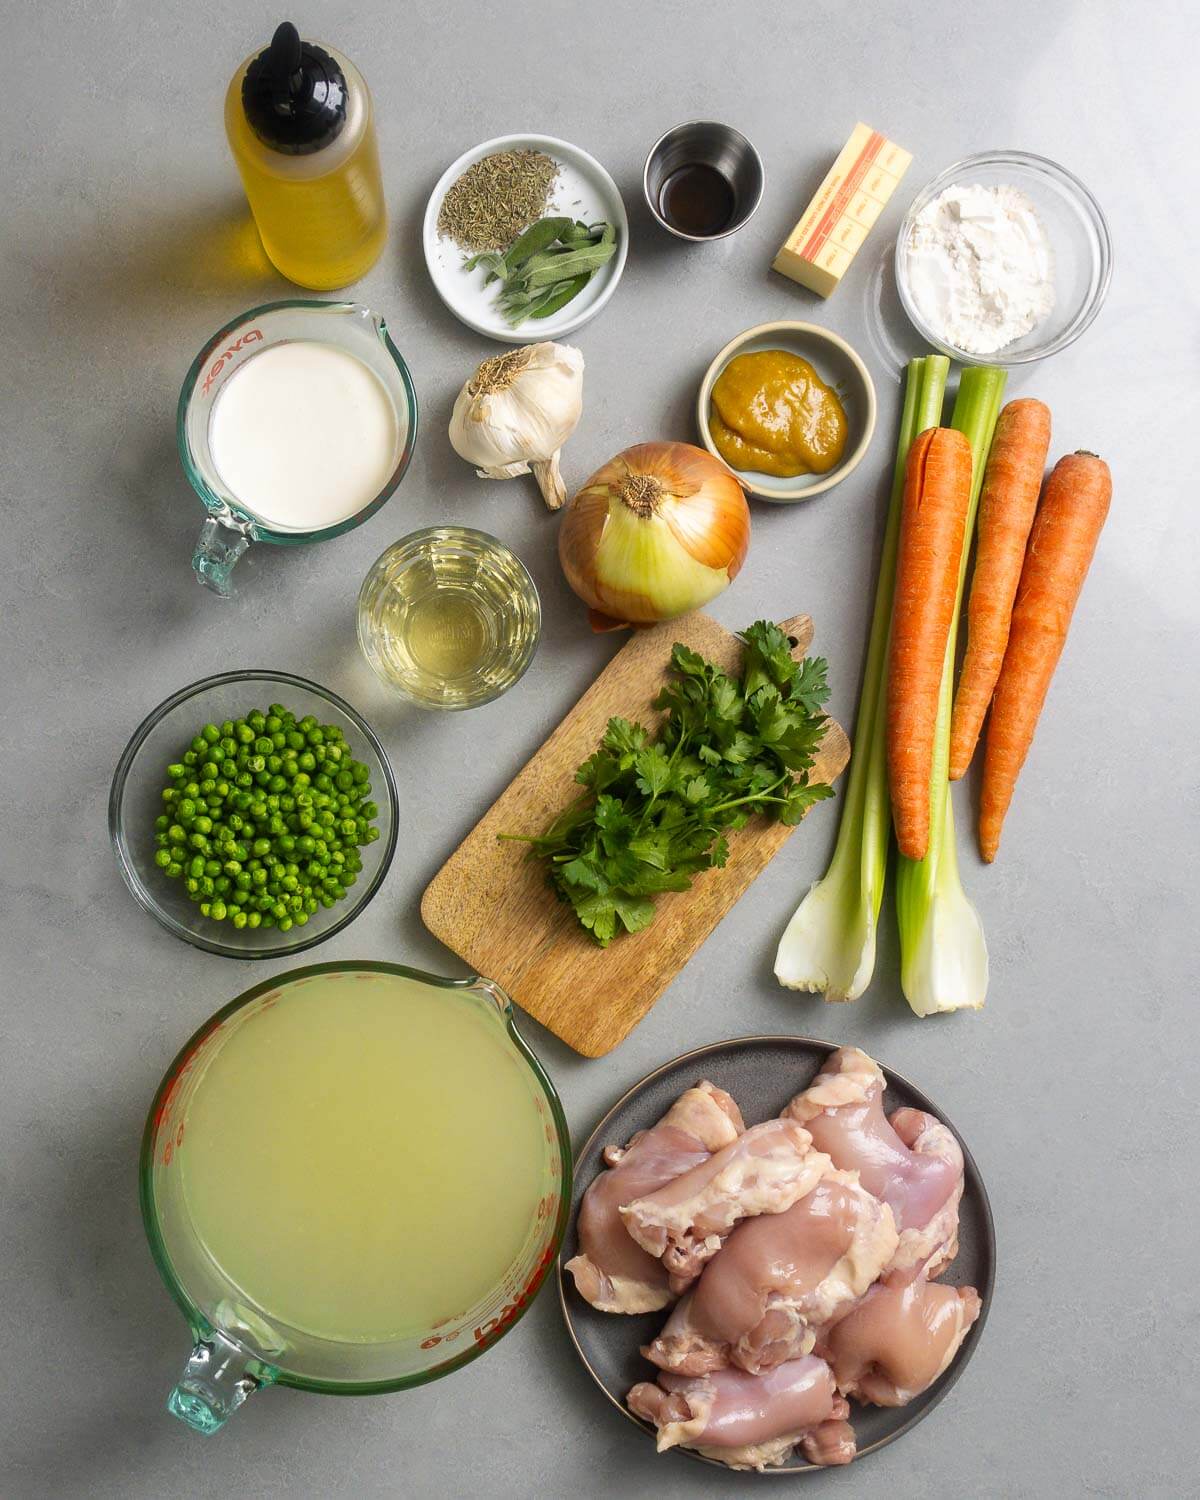 Soup ingredients shown: olive oil, herbs, worcestershire sauce, butter, flour, cream, garlic, chicken base, onion, wine, celery, carrots, peas, chicken stock, and chicken thighs.